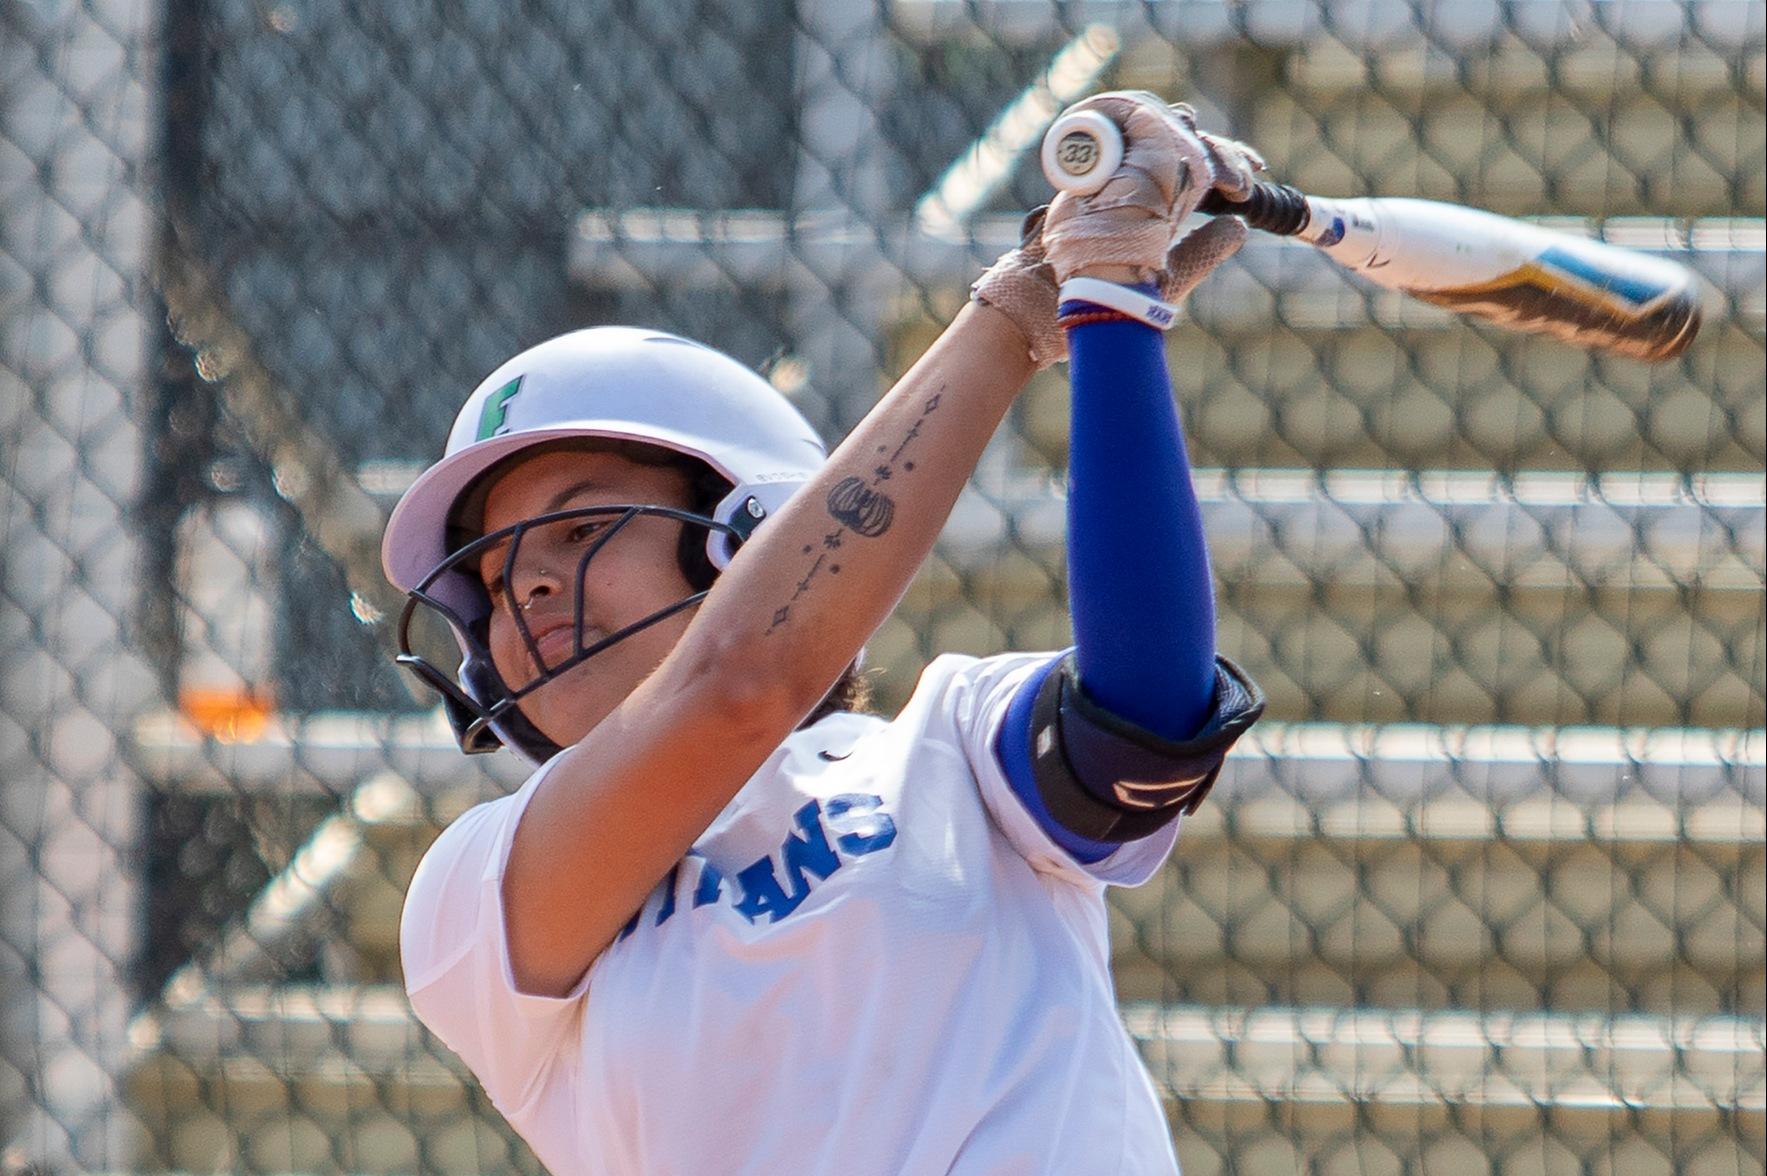 Softball team hits walkoff in Game 1, splits with College of Central Florida